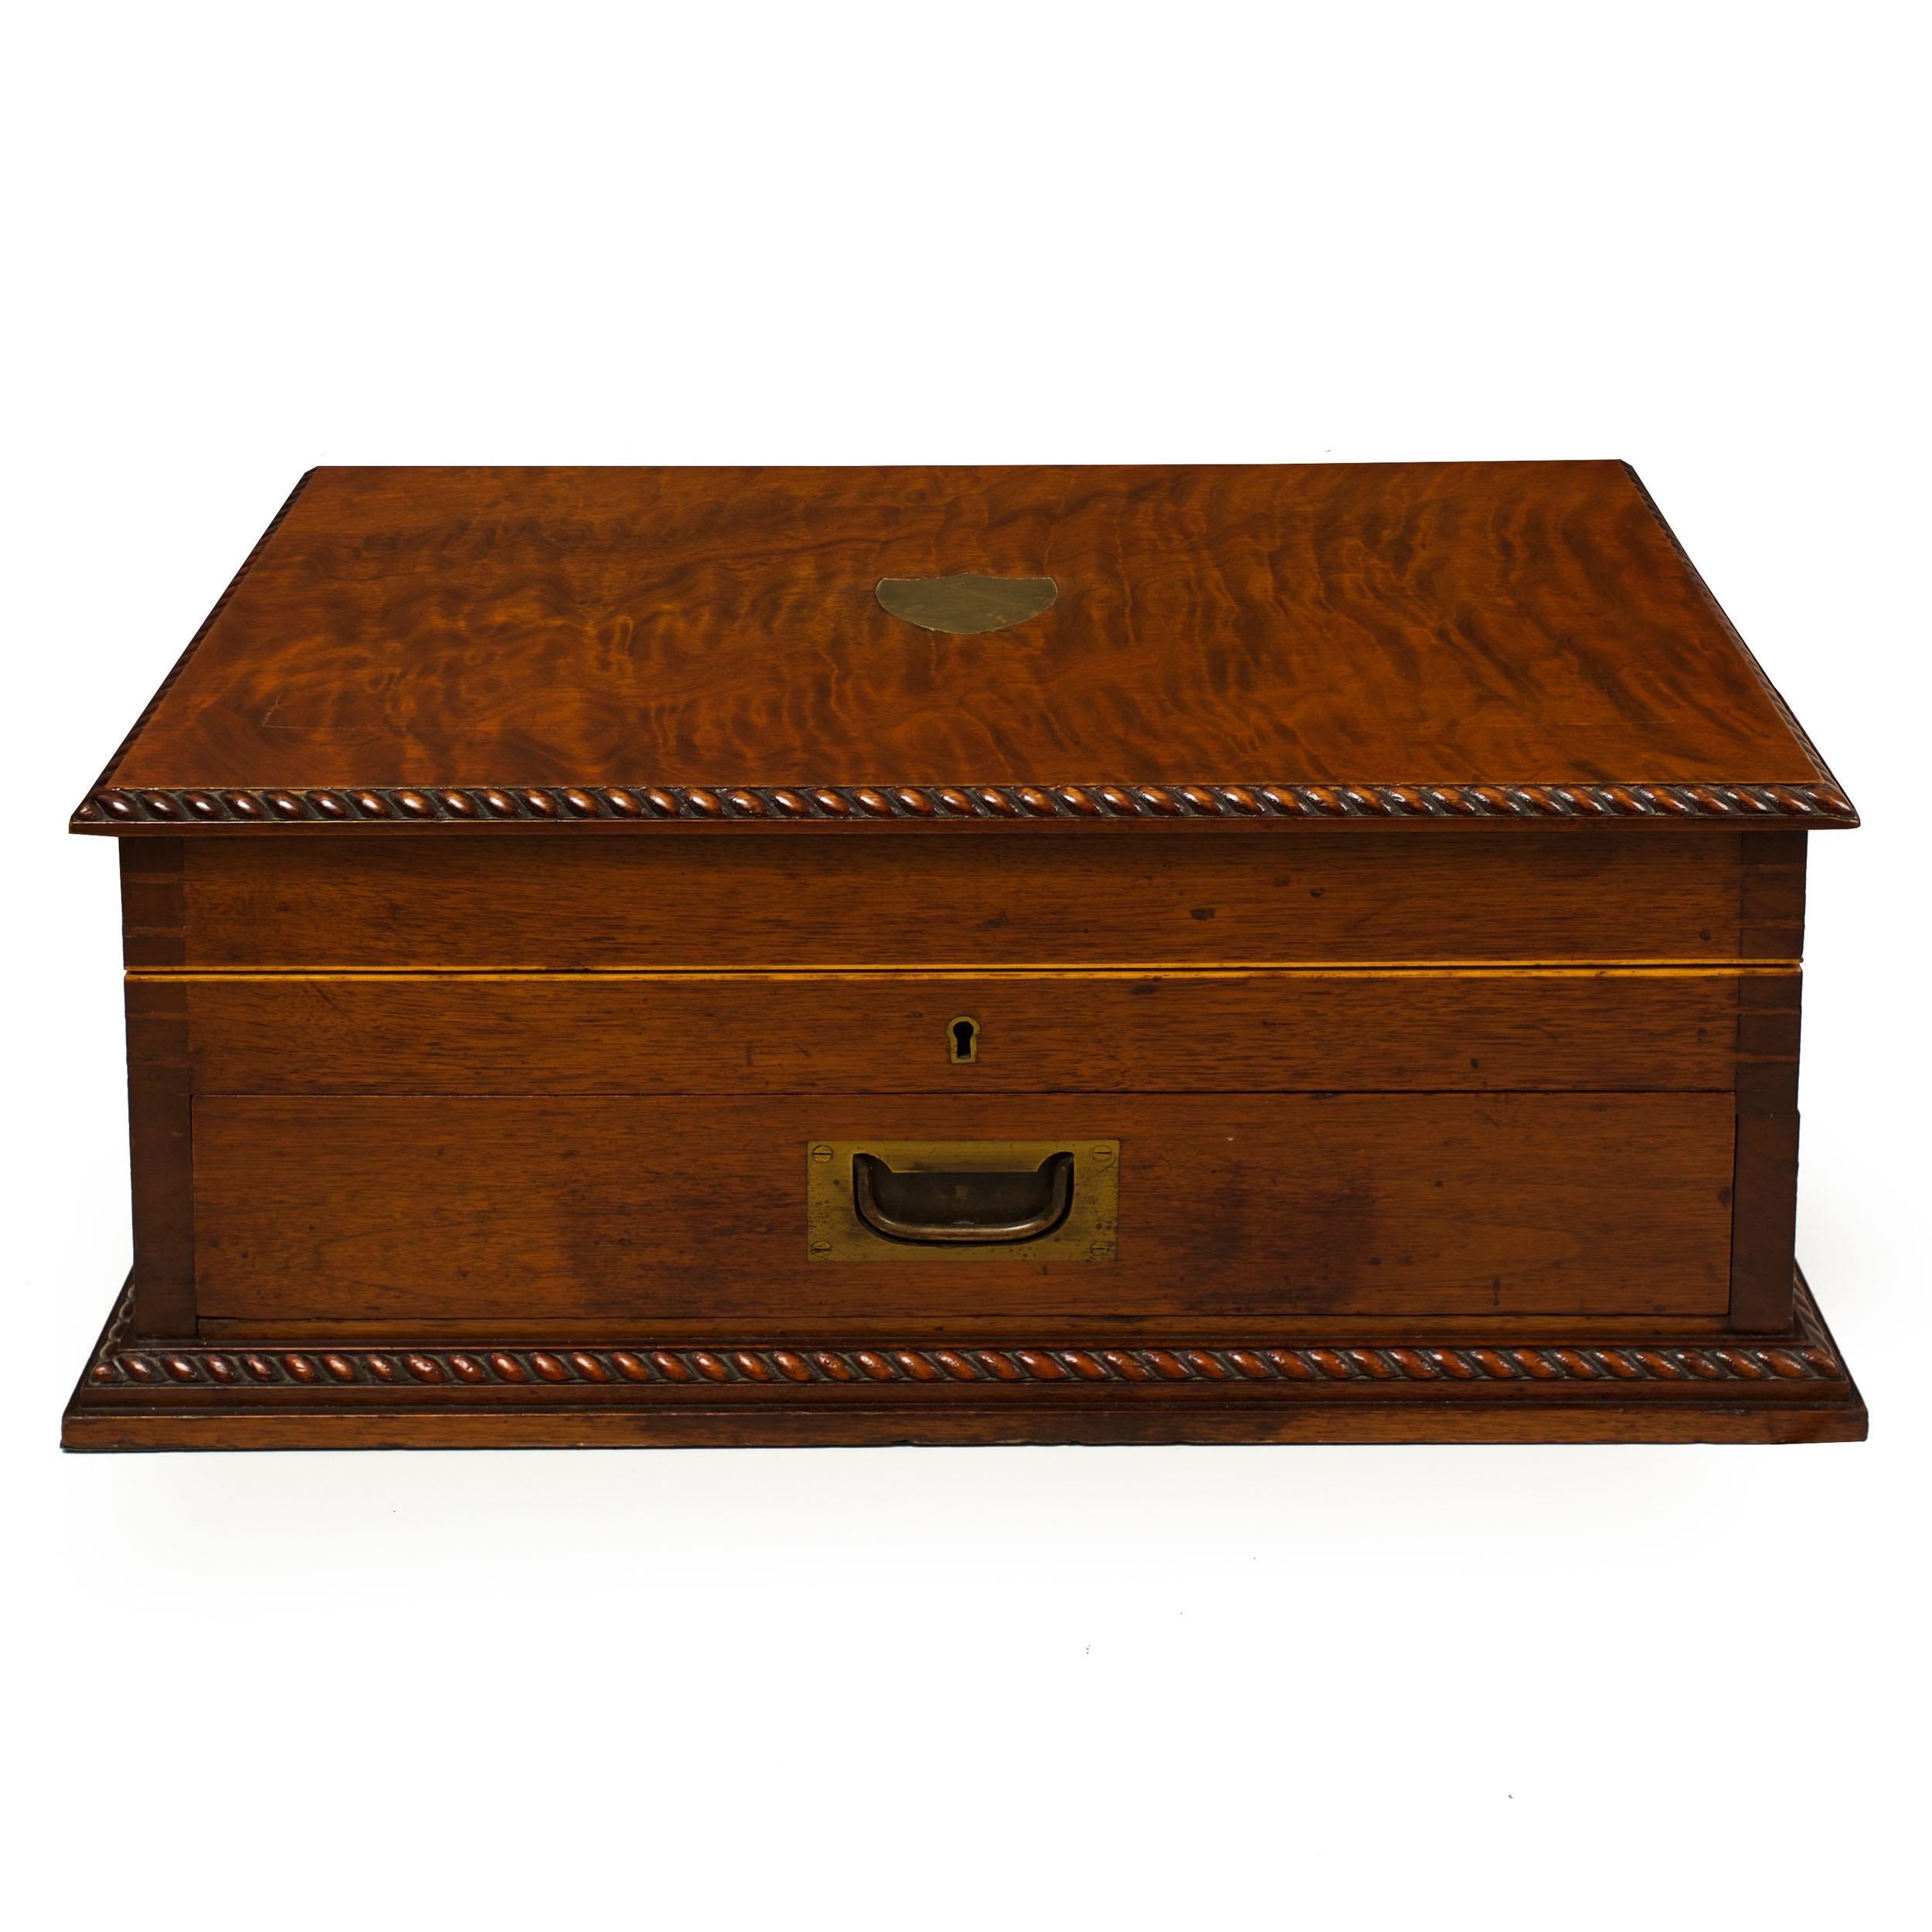 A gorgeous and inordinately well made cutlery box by Walker & Hall of Sheffield, it is executed in vibrant walnut primary woods throughout with matched gadrooned molding around the top and base. The joinery is of self-evident excellence, all corners